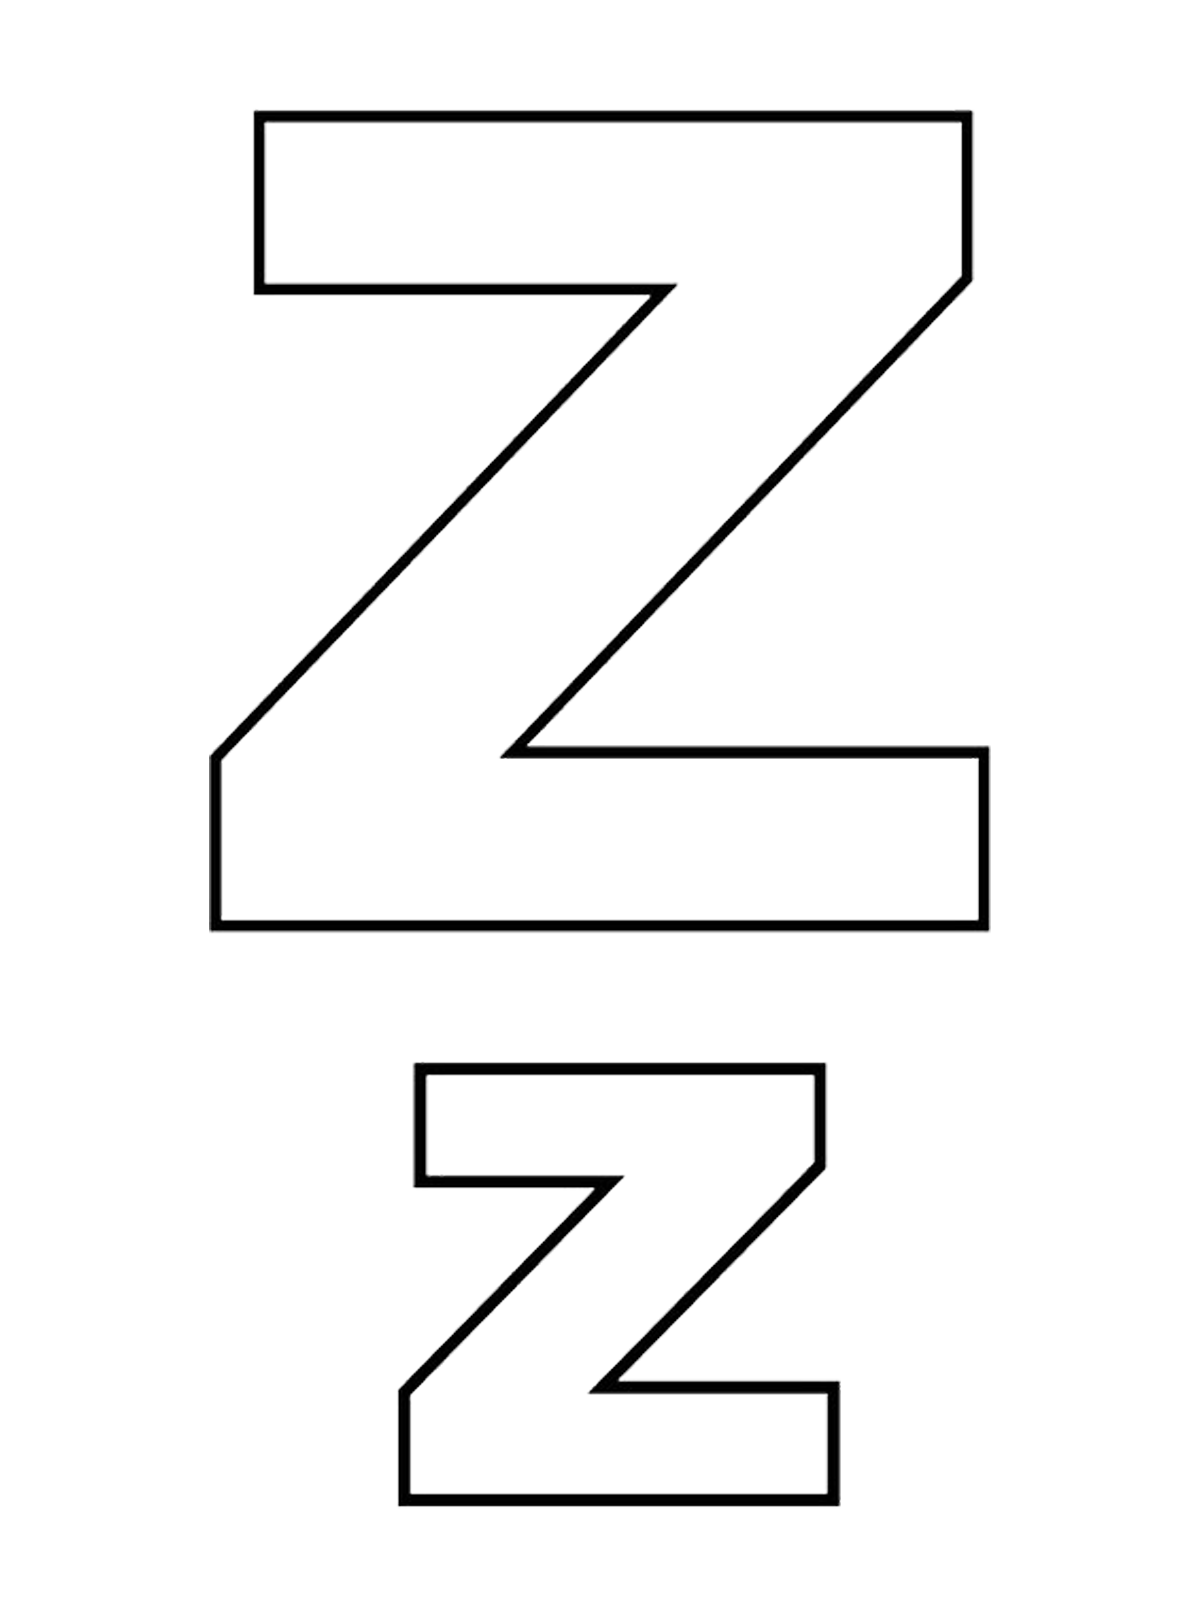 Letters and numbers - Letter Z capital letters and lowercase